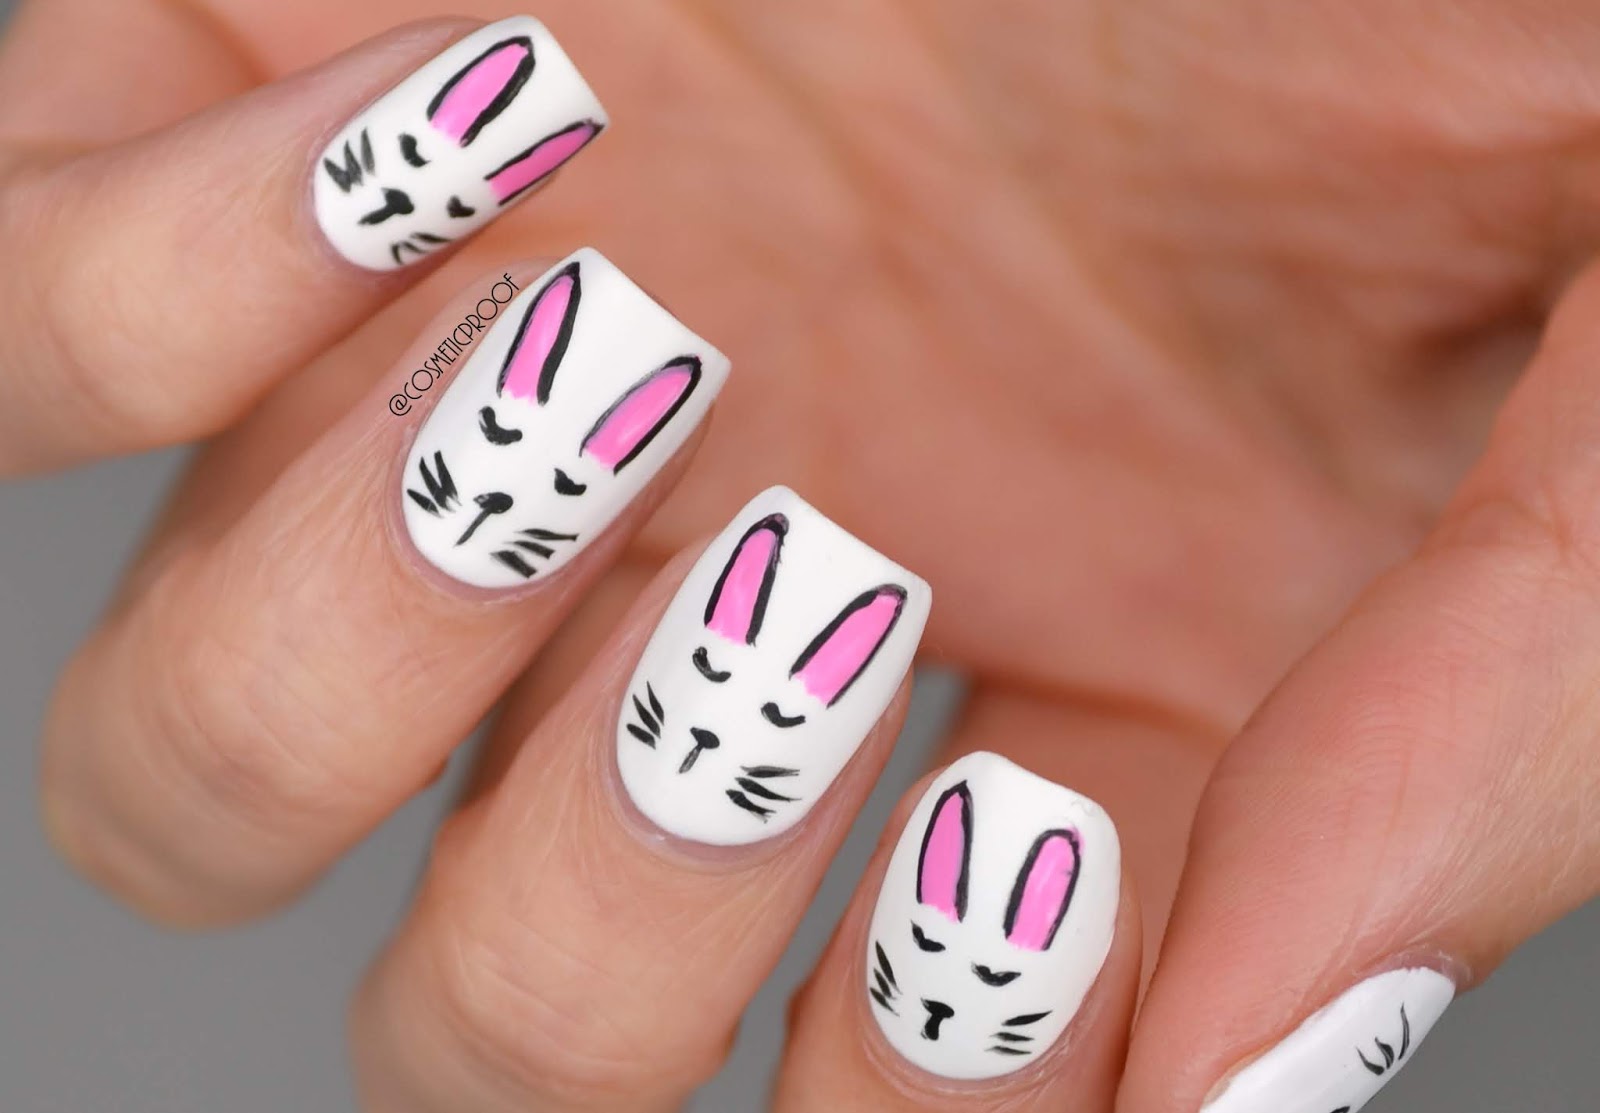 3. Easter Bunny Nail Art - wide 10